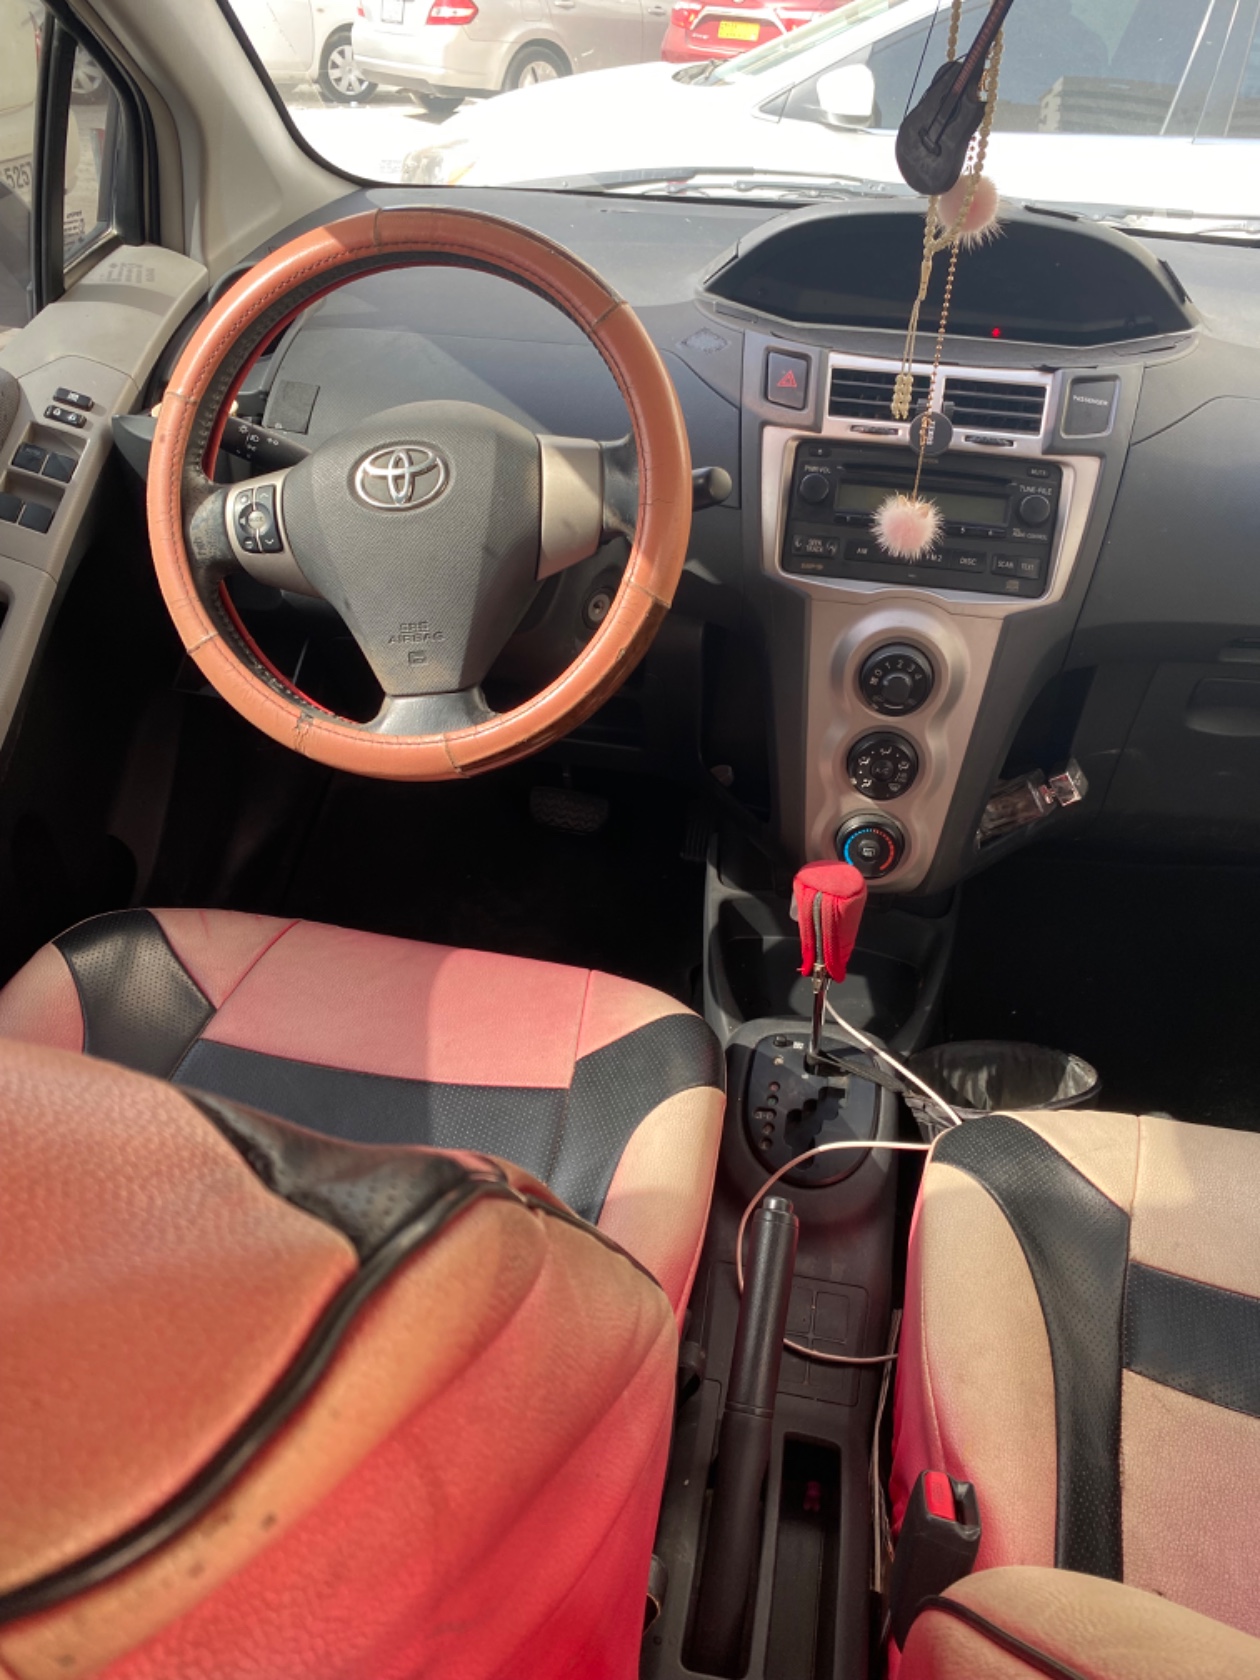 Well-Maintained 2010 Toyota Yaris Offered at Great Value